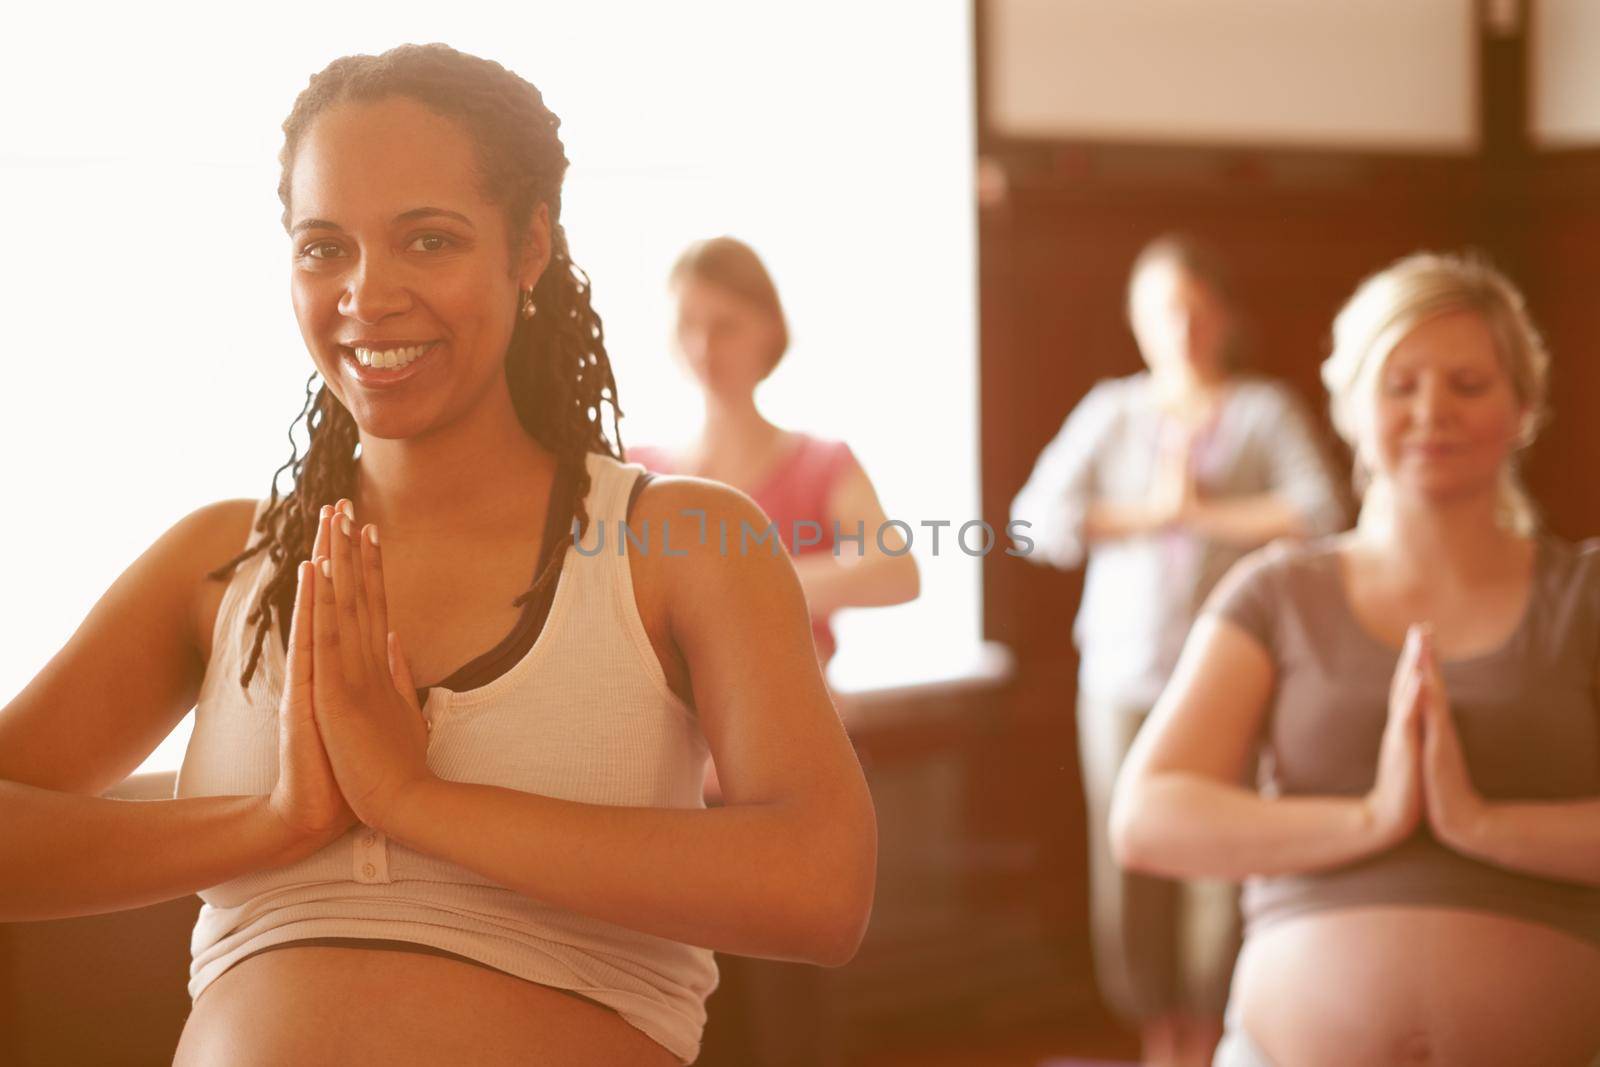 Yoga, wellness and meditation of pregnant women with prayer hands sign for spiritual, calm and healthy lifestyle. Happy personal trainer meditate in yoga class, welcome smile in a zen studio portrait by YuriArcurs